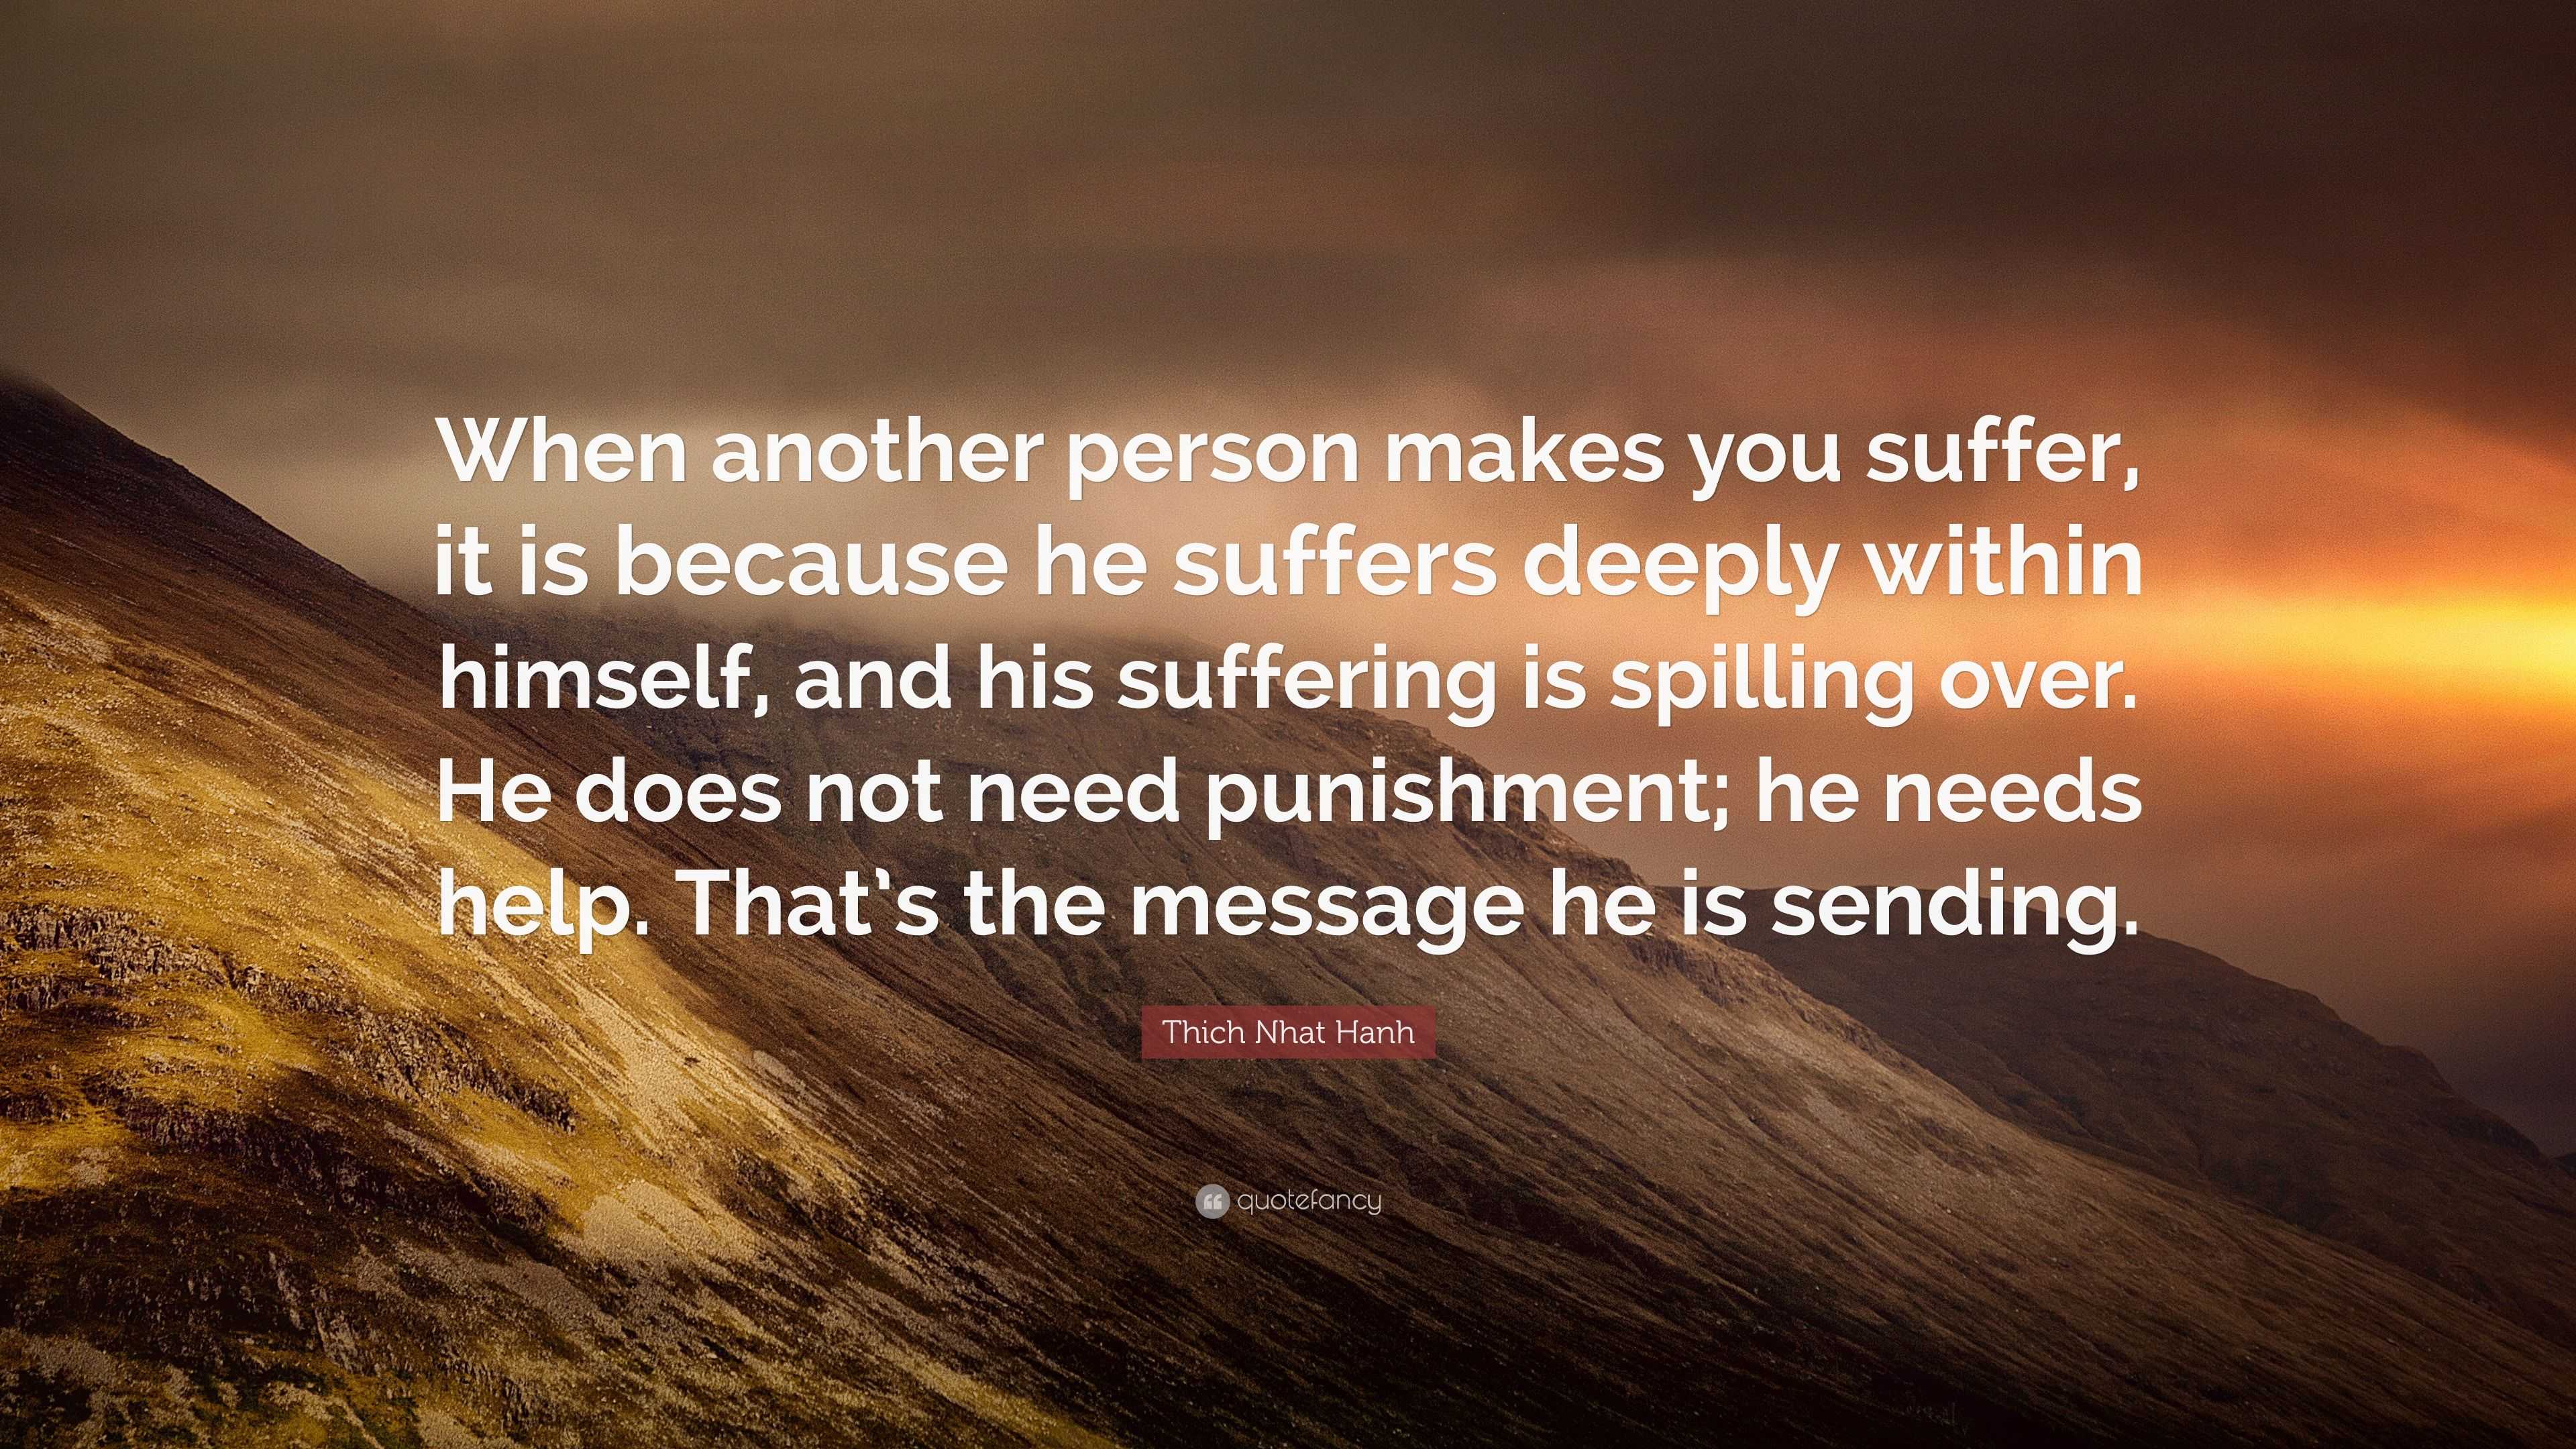 4699399 Thich Nhat Hanh Quote When another person makes you suffer it is